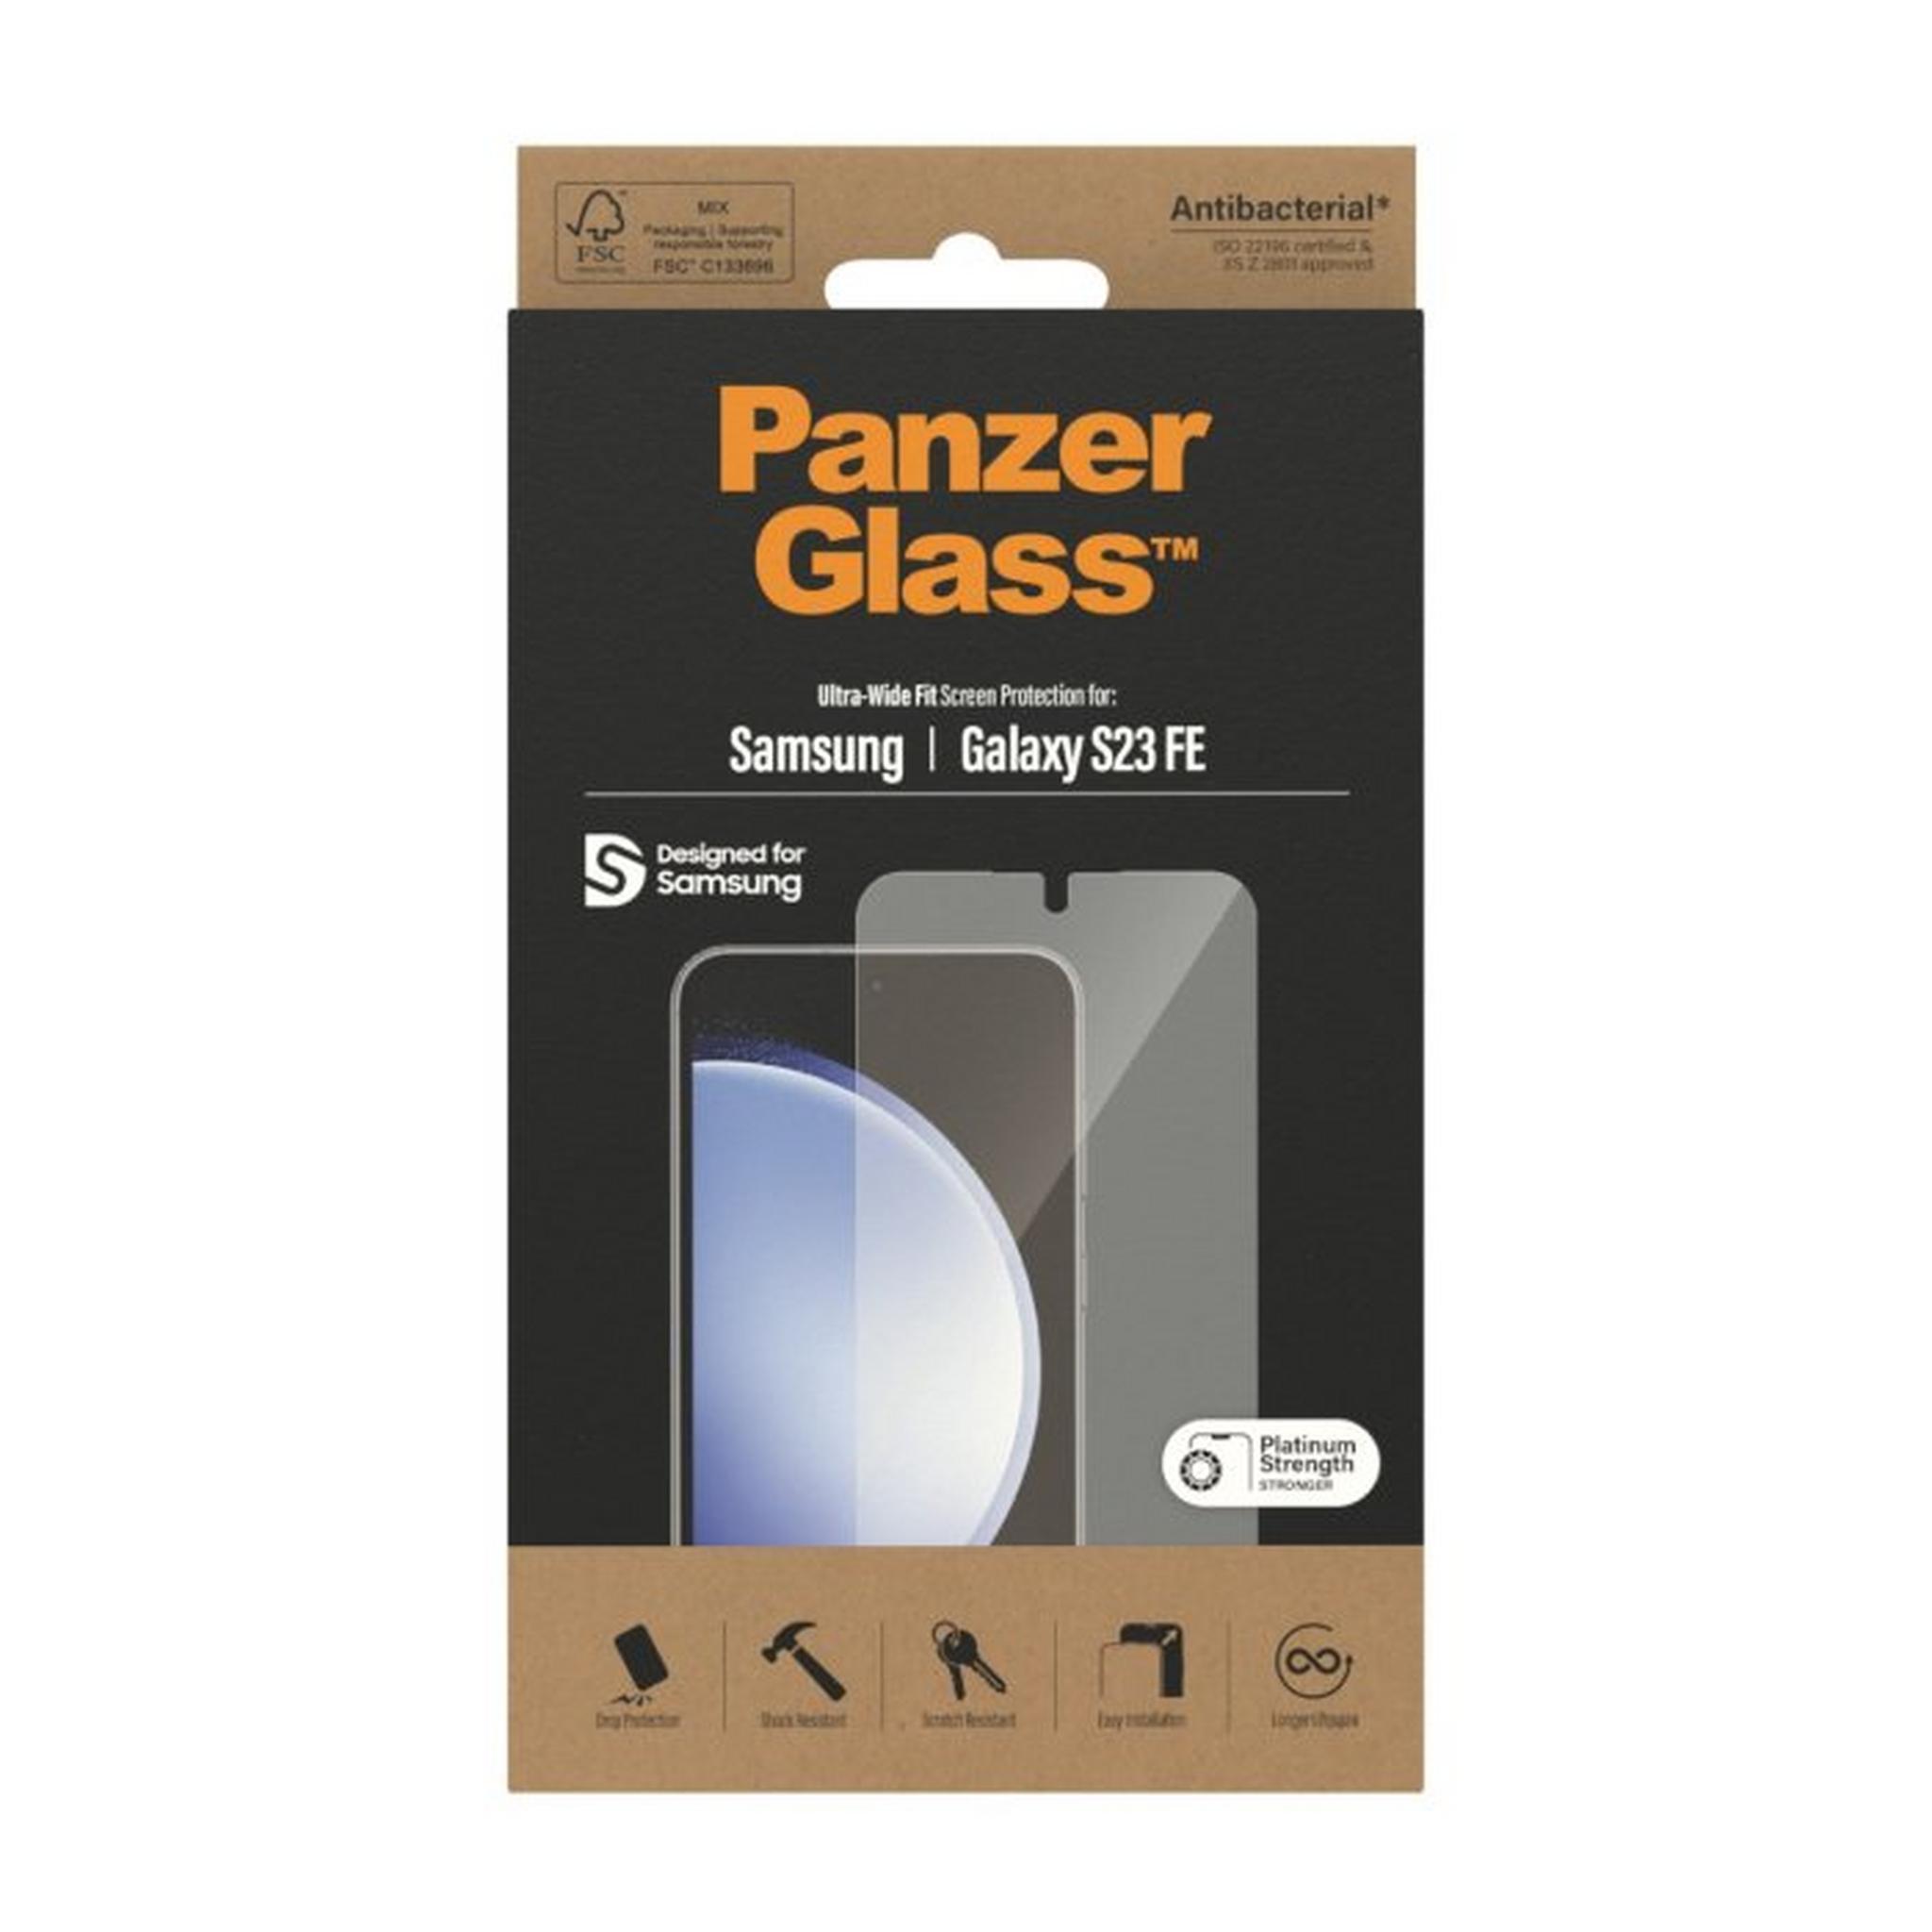 PANZER Glass Screen Protector Samsung Galaxy S23 Fe, Ultra-Wide Fit, 7341